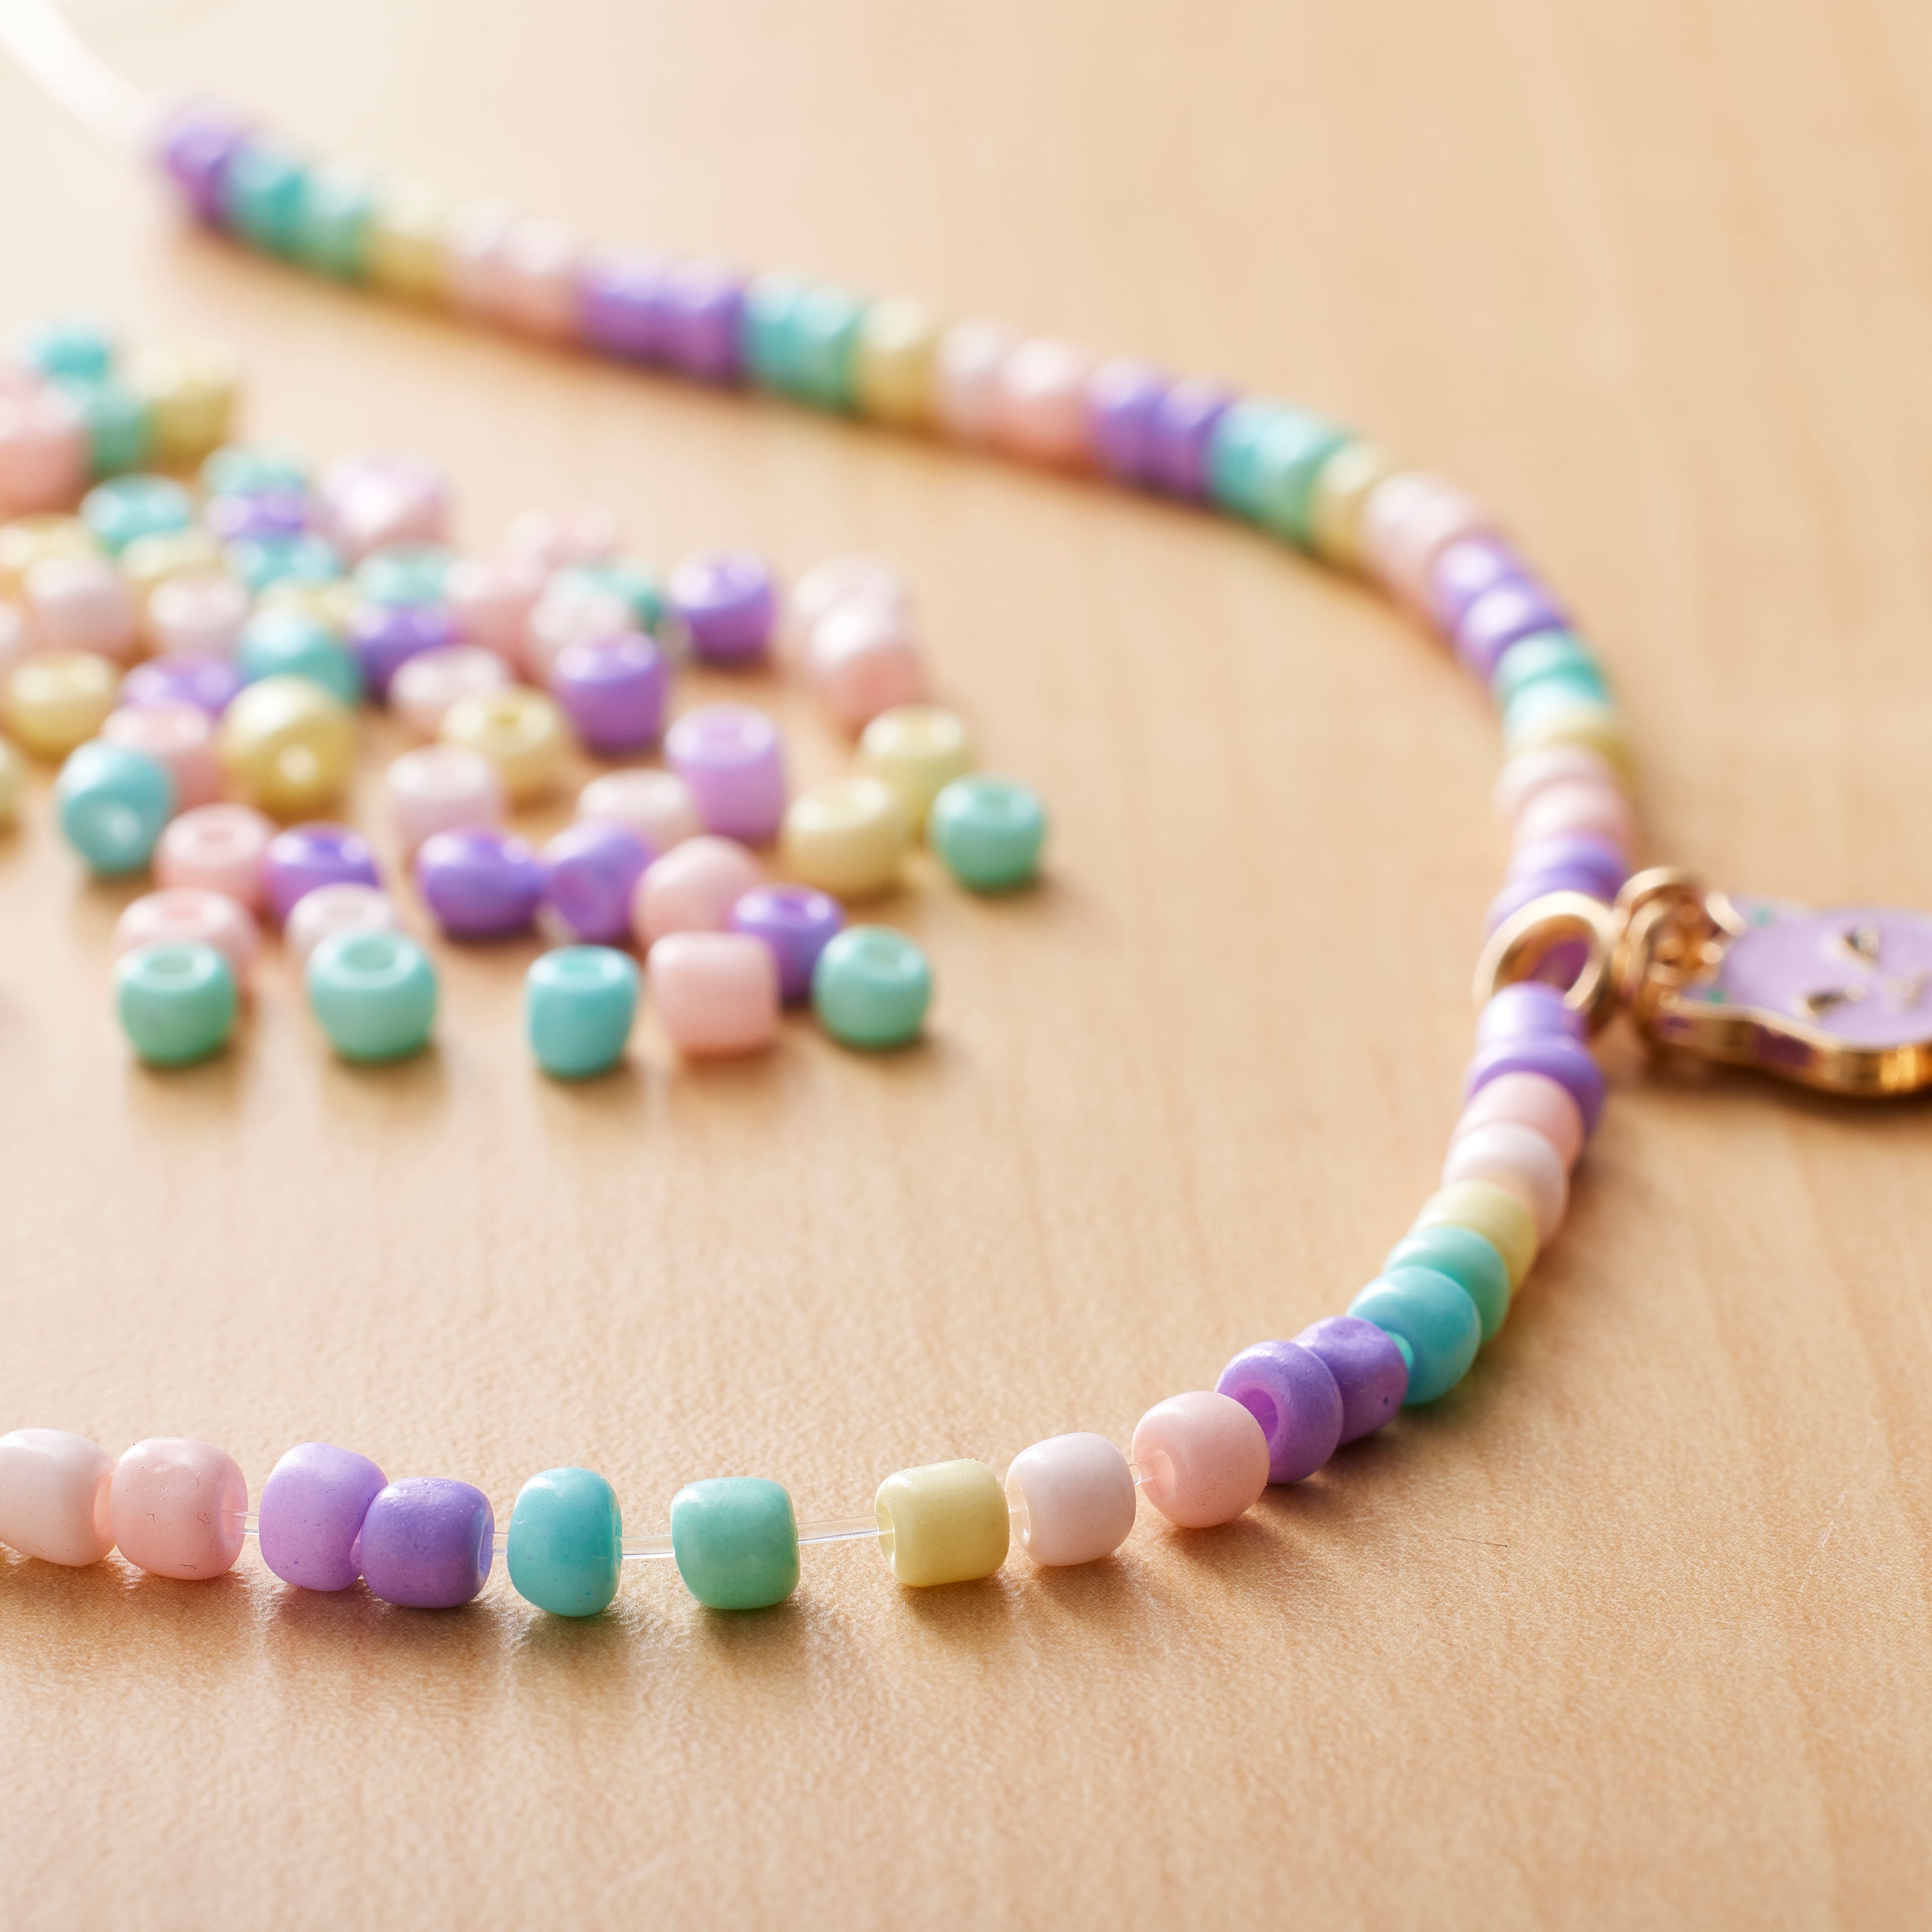 Pastel Seed Beads by Creatology&#x2122;